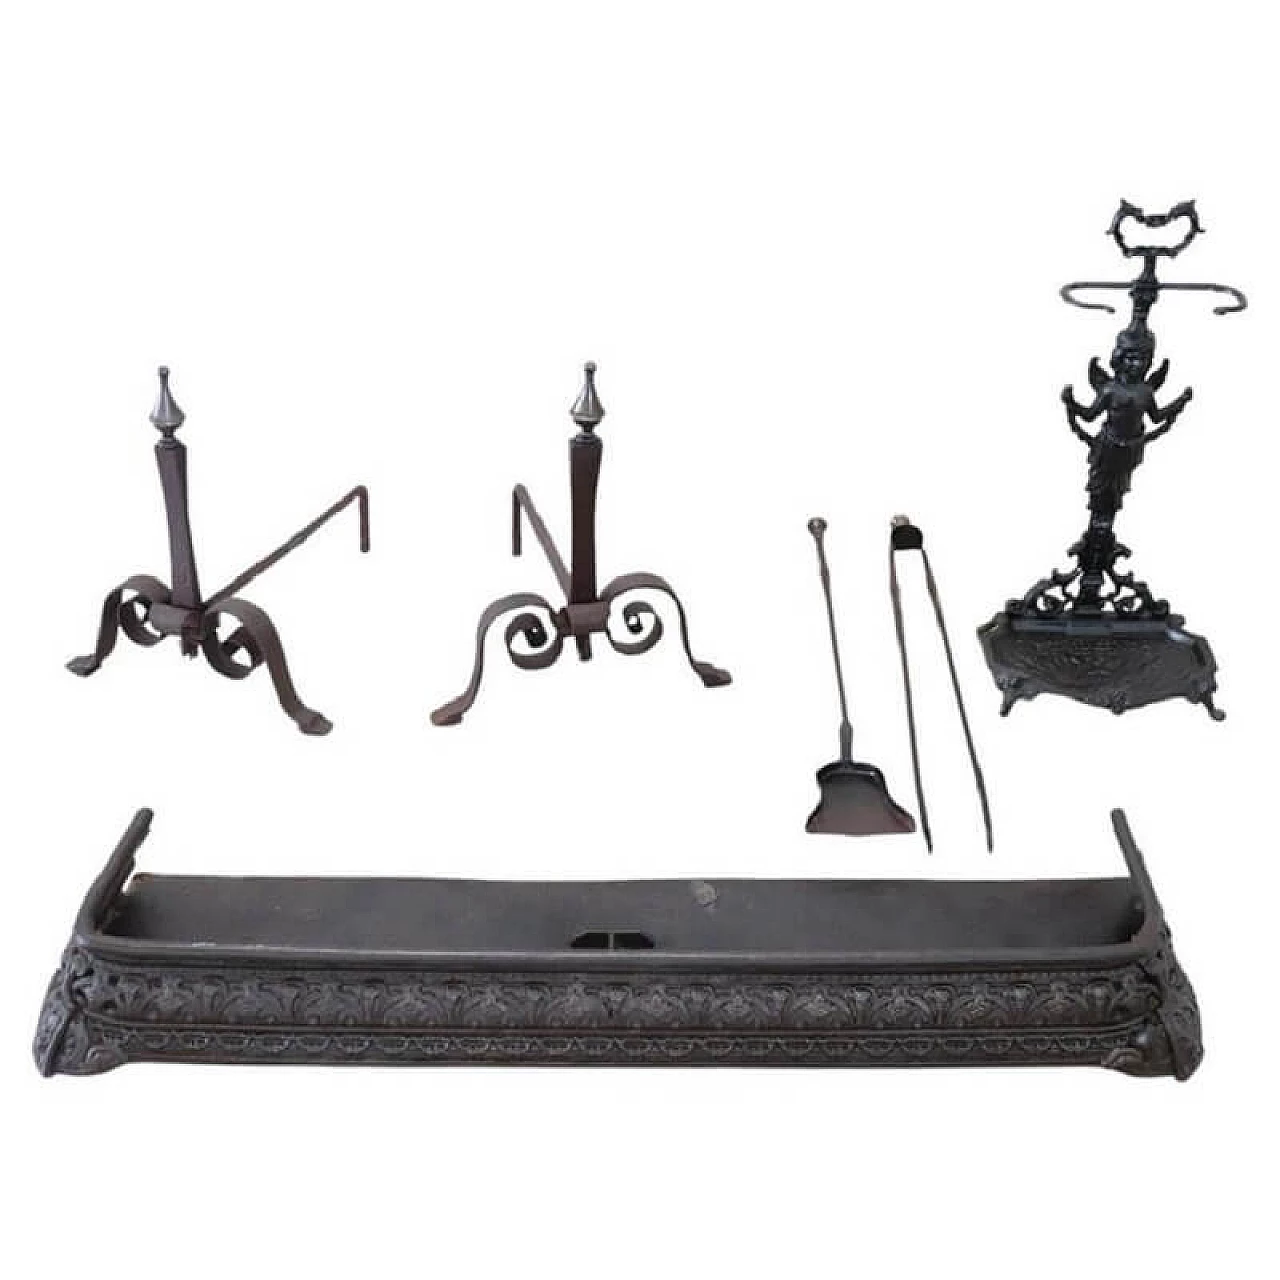 6 Fireplace accessories in wrought iron and cast iron, early 19th century 1